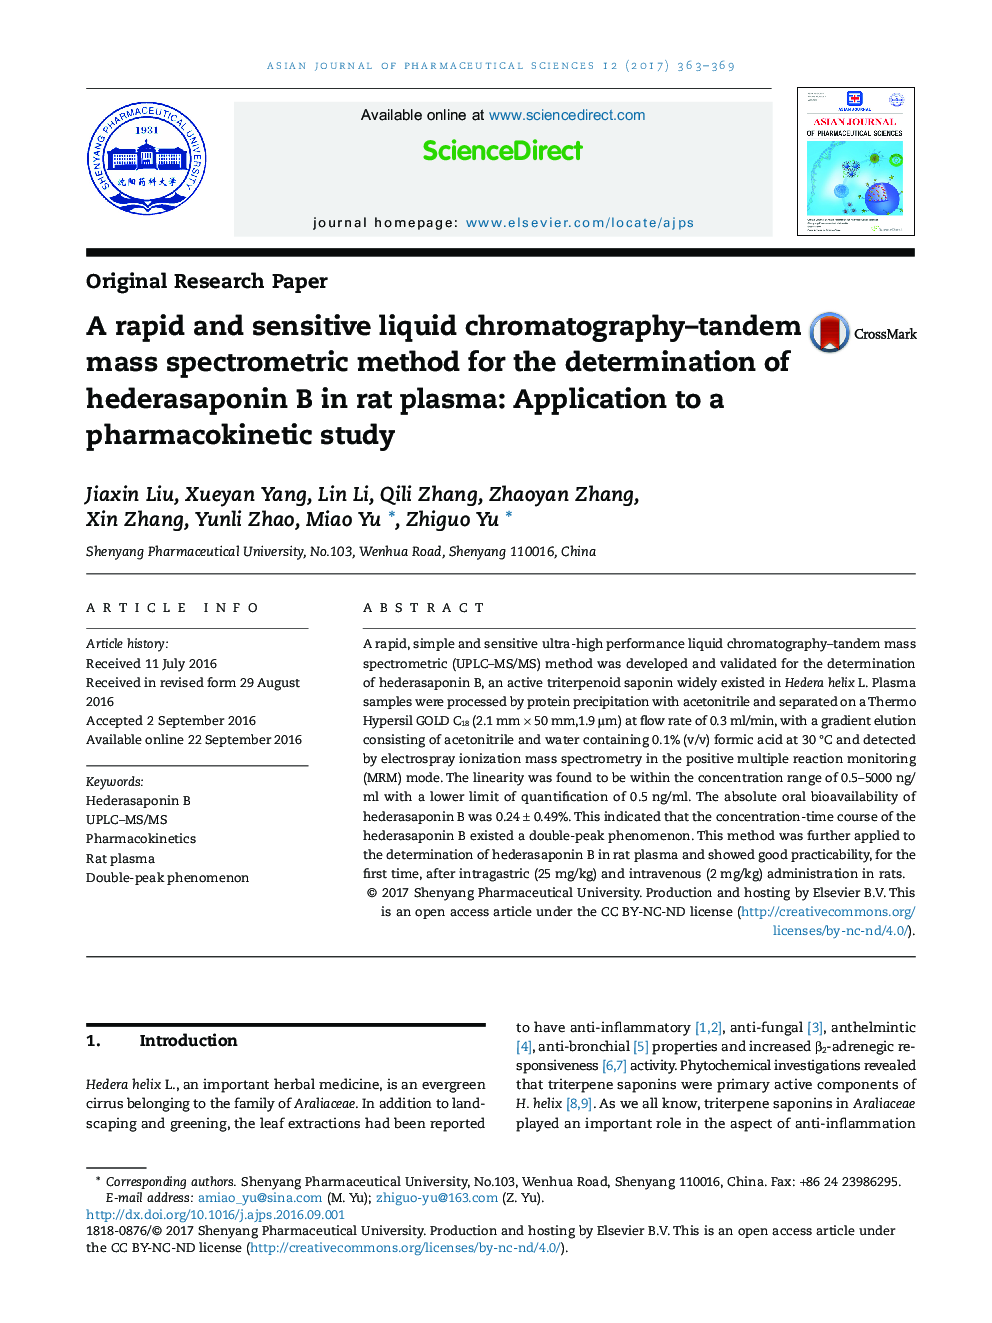 A rapid and sensitive liquid chromatography-tandem mass spectrometric method for the determination of hederasaponin B in rat plasma: Application to a pharmacokinetic study